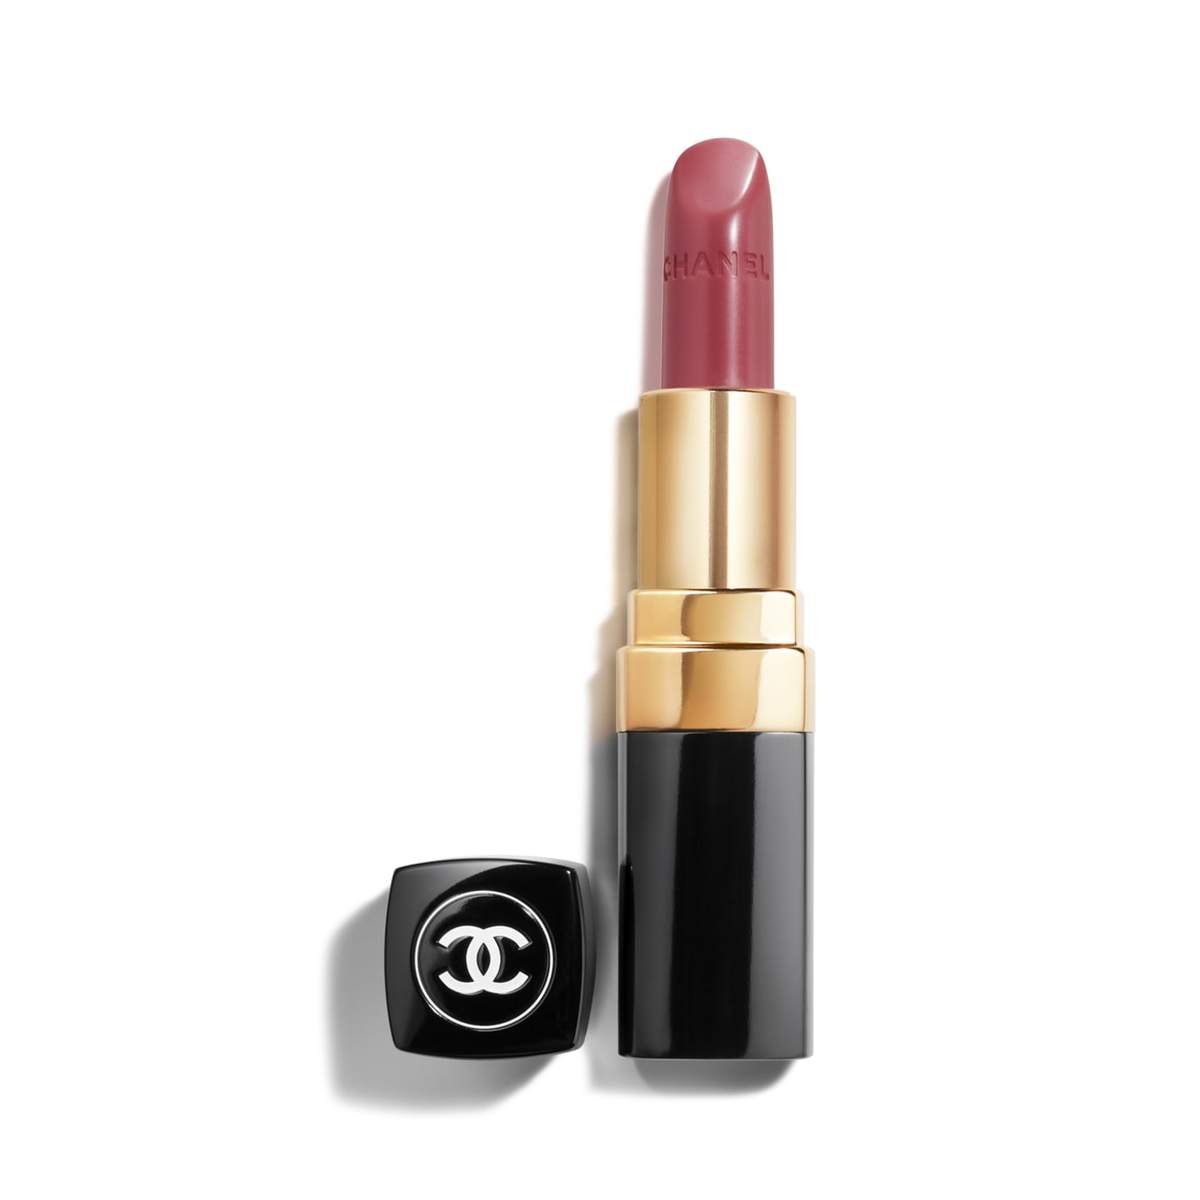 Chanel Beauty Releases 'Le Blanc' Makeup Collection